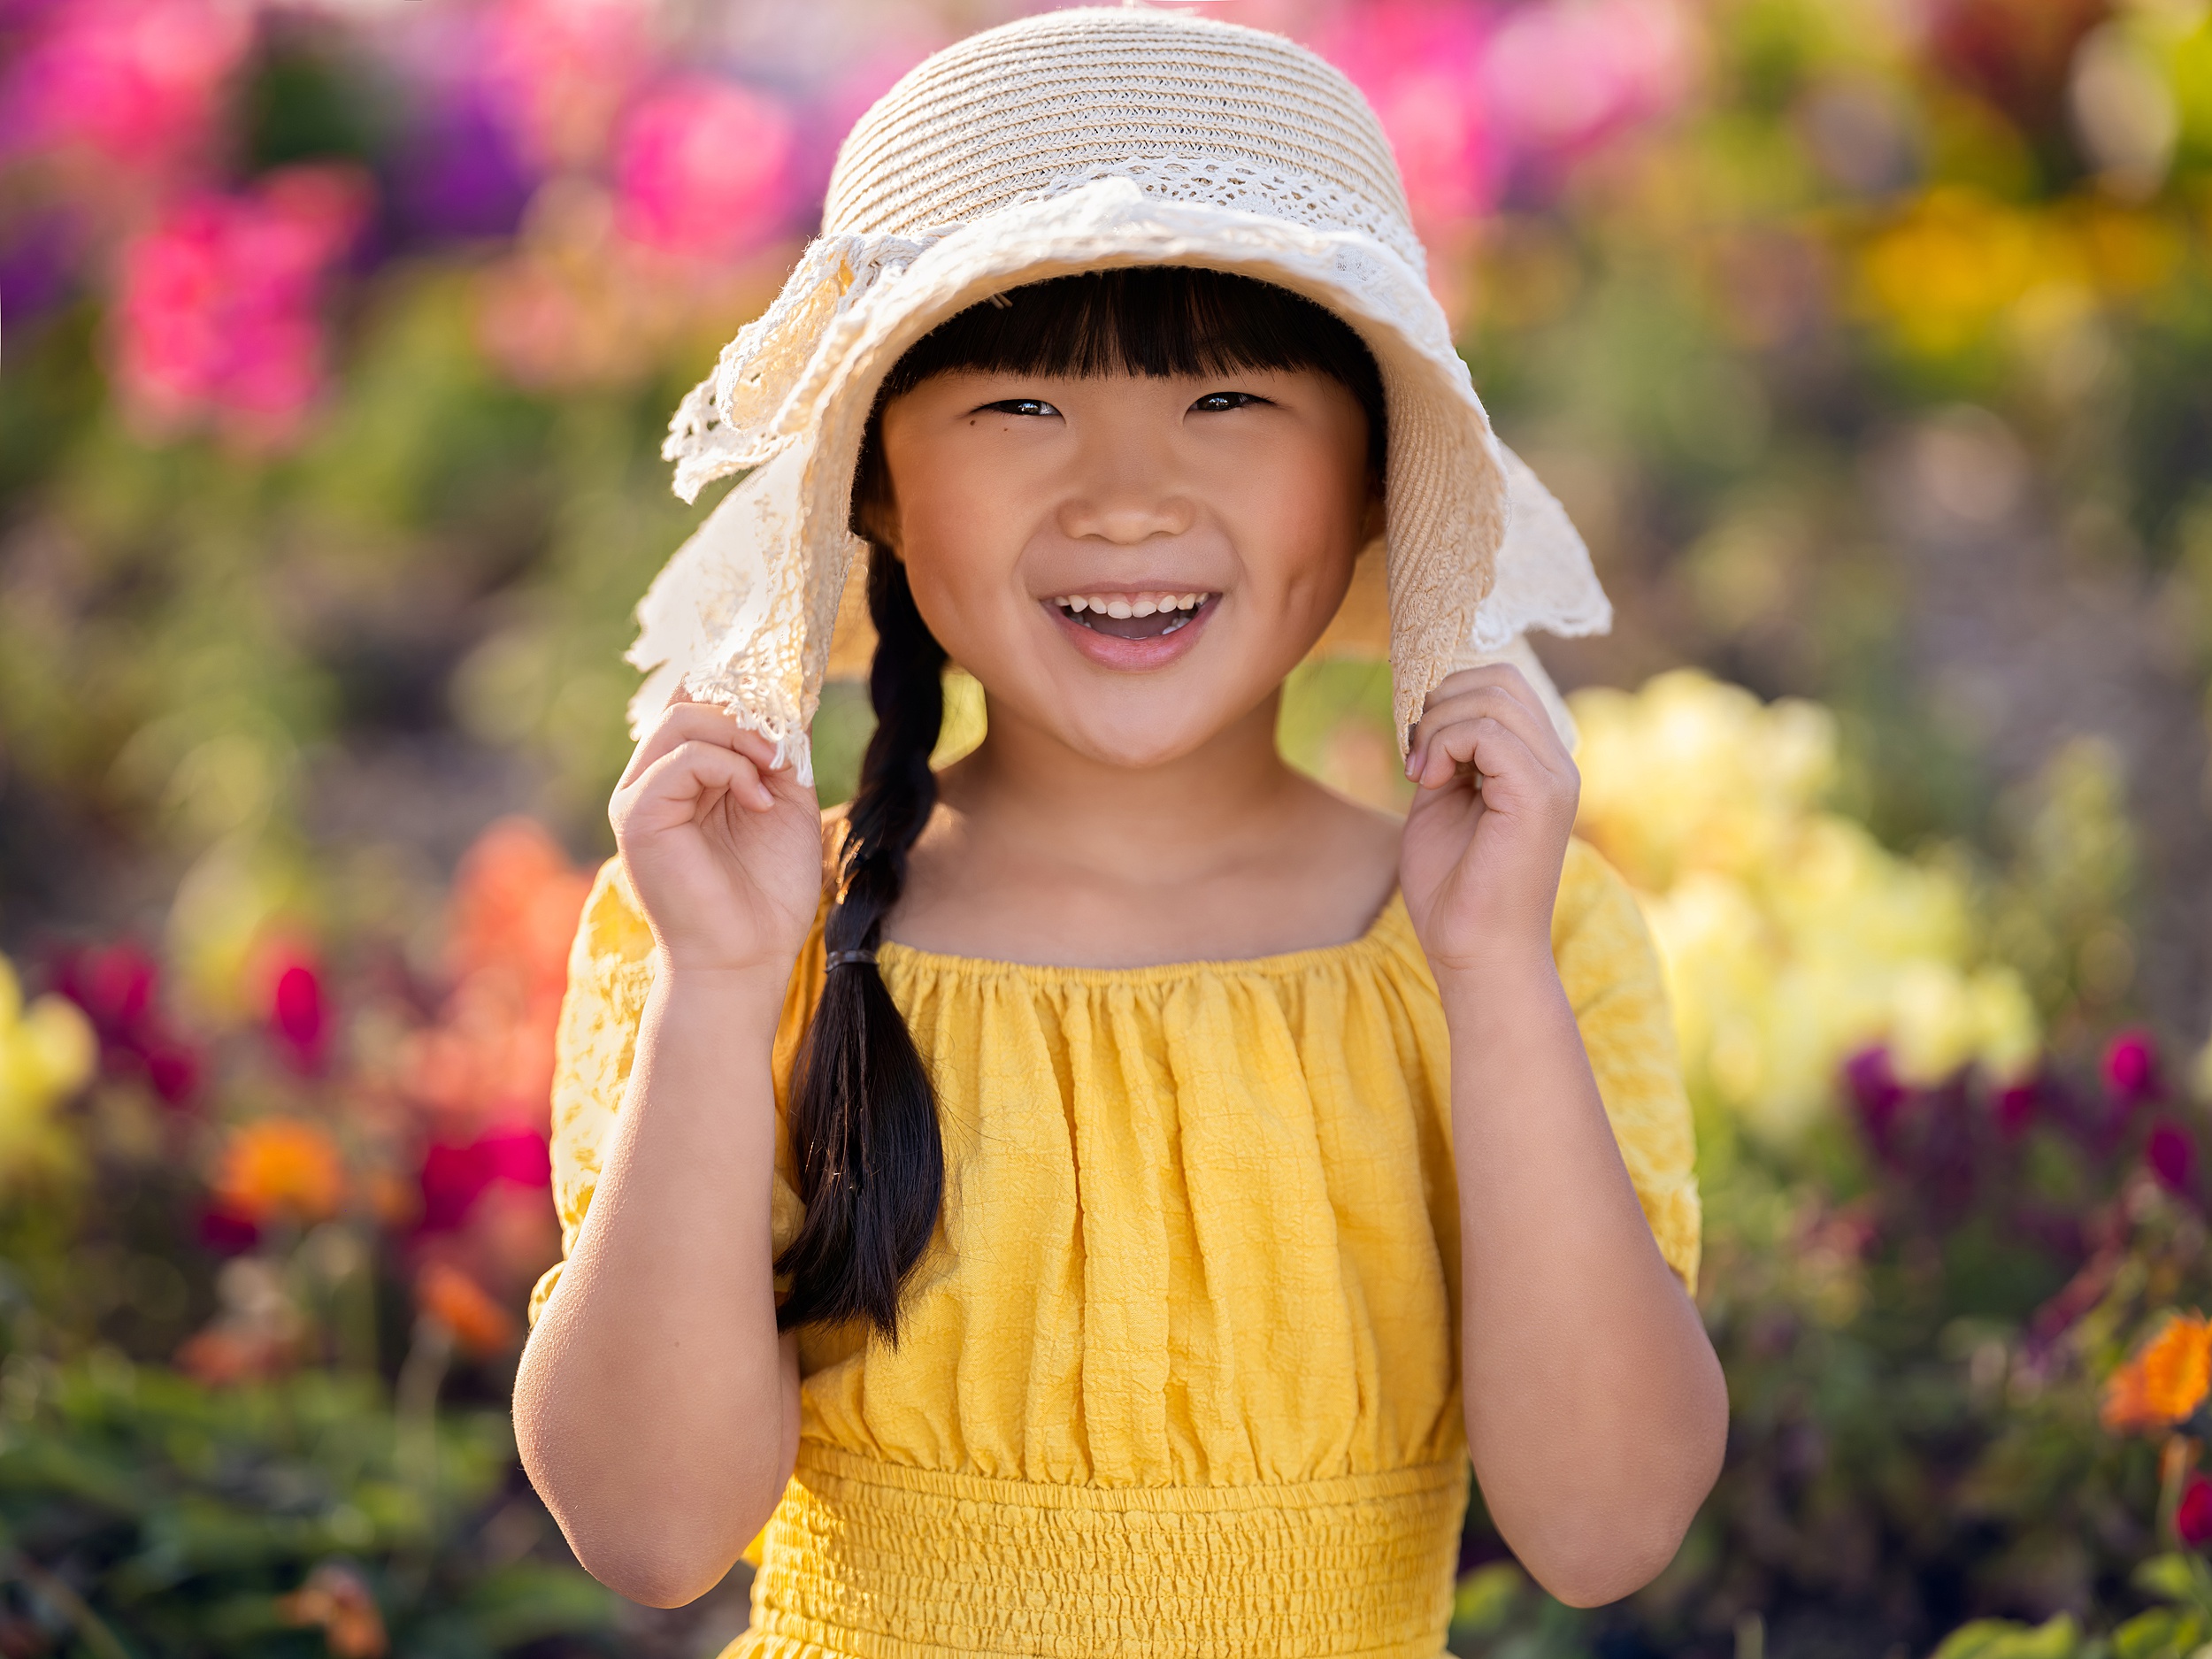 A young girl in a yellow dress pulls her woven hat over her ears while standing in a flower garden